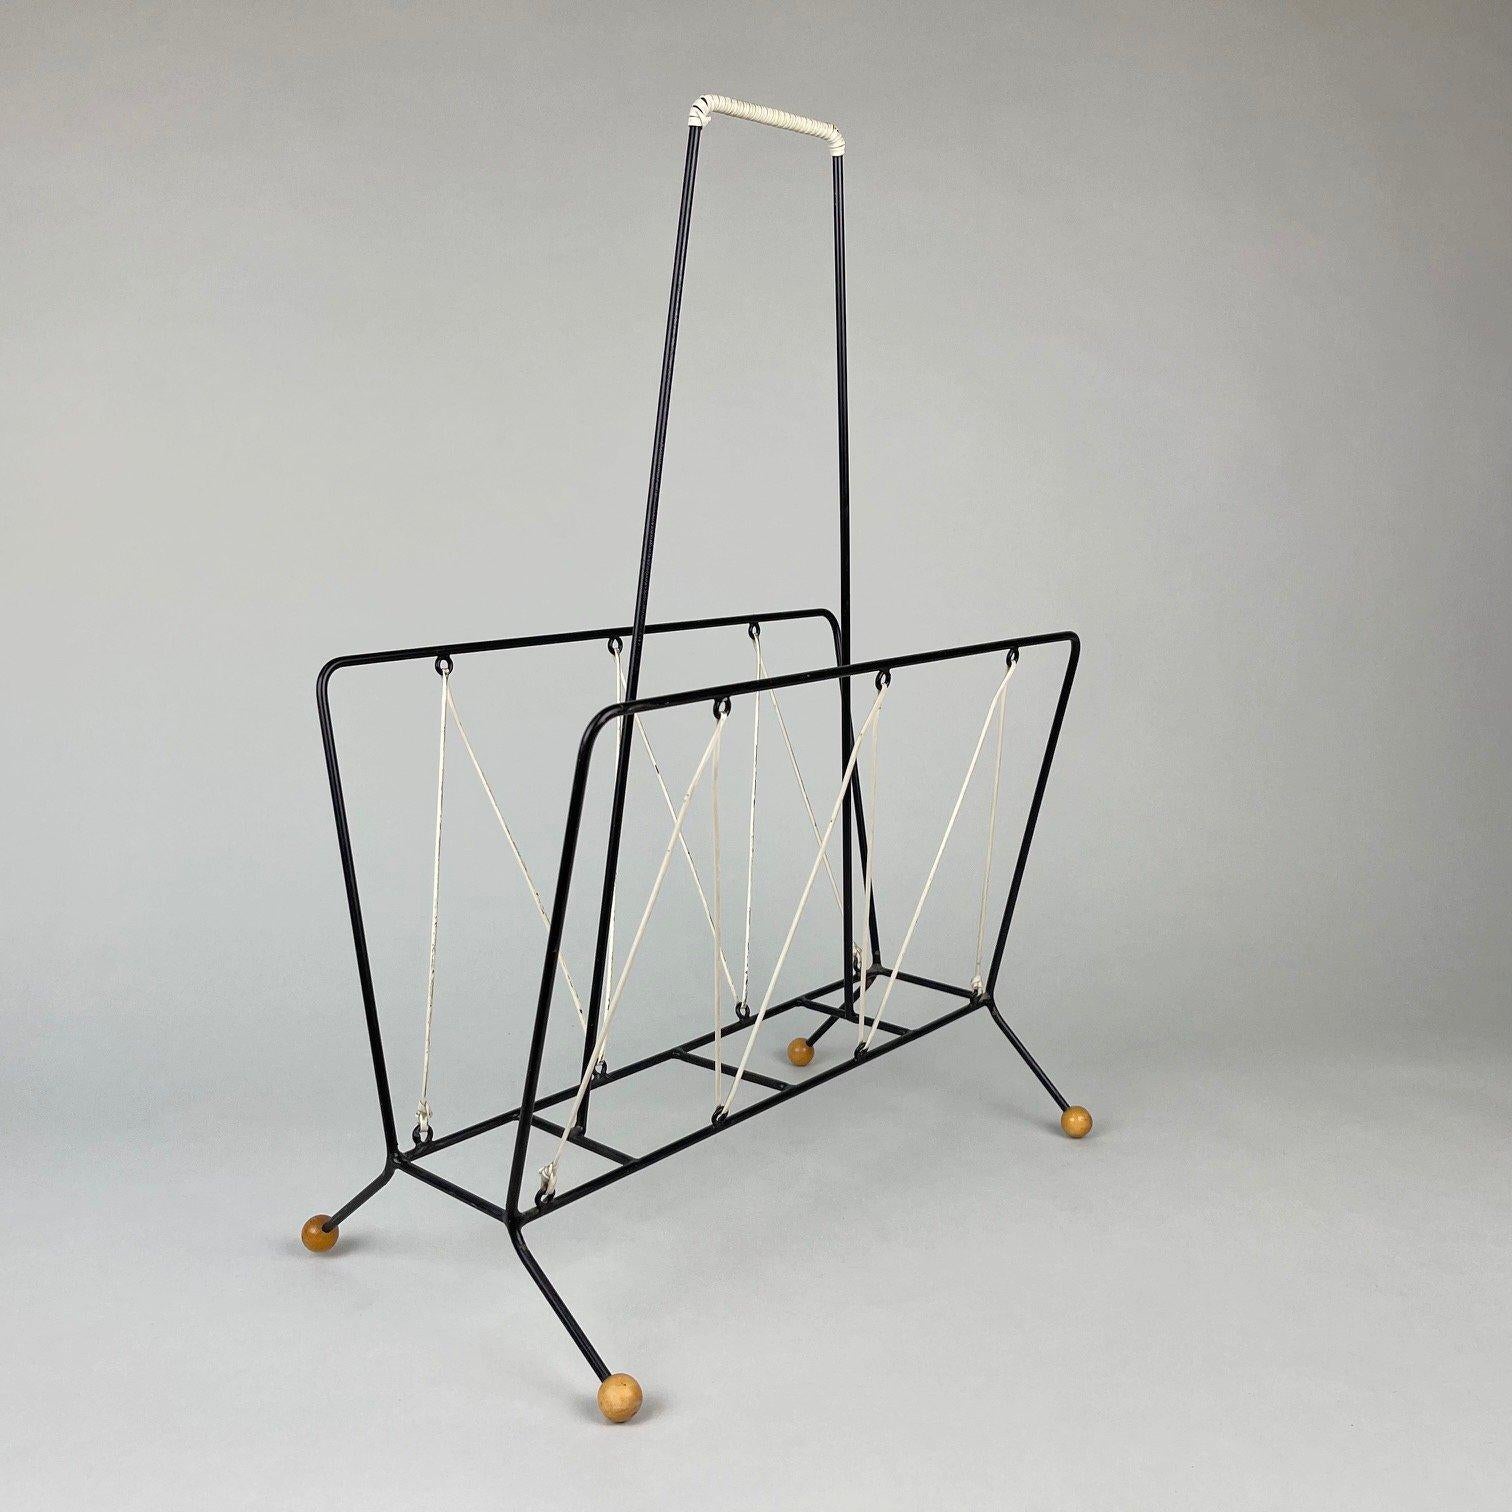 Vintage metal magazine rack intertwined with a rubber cord.